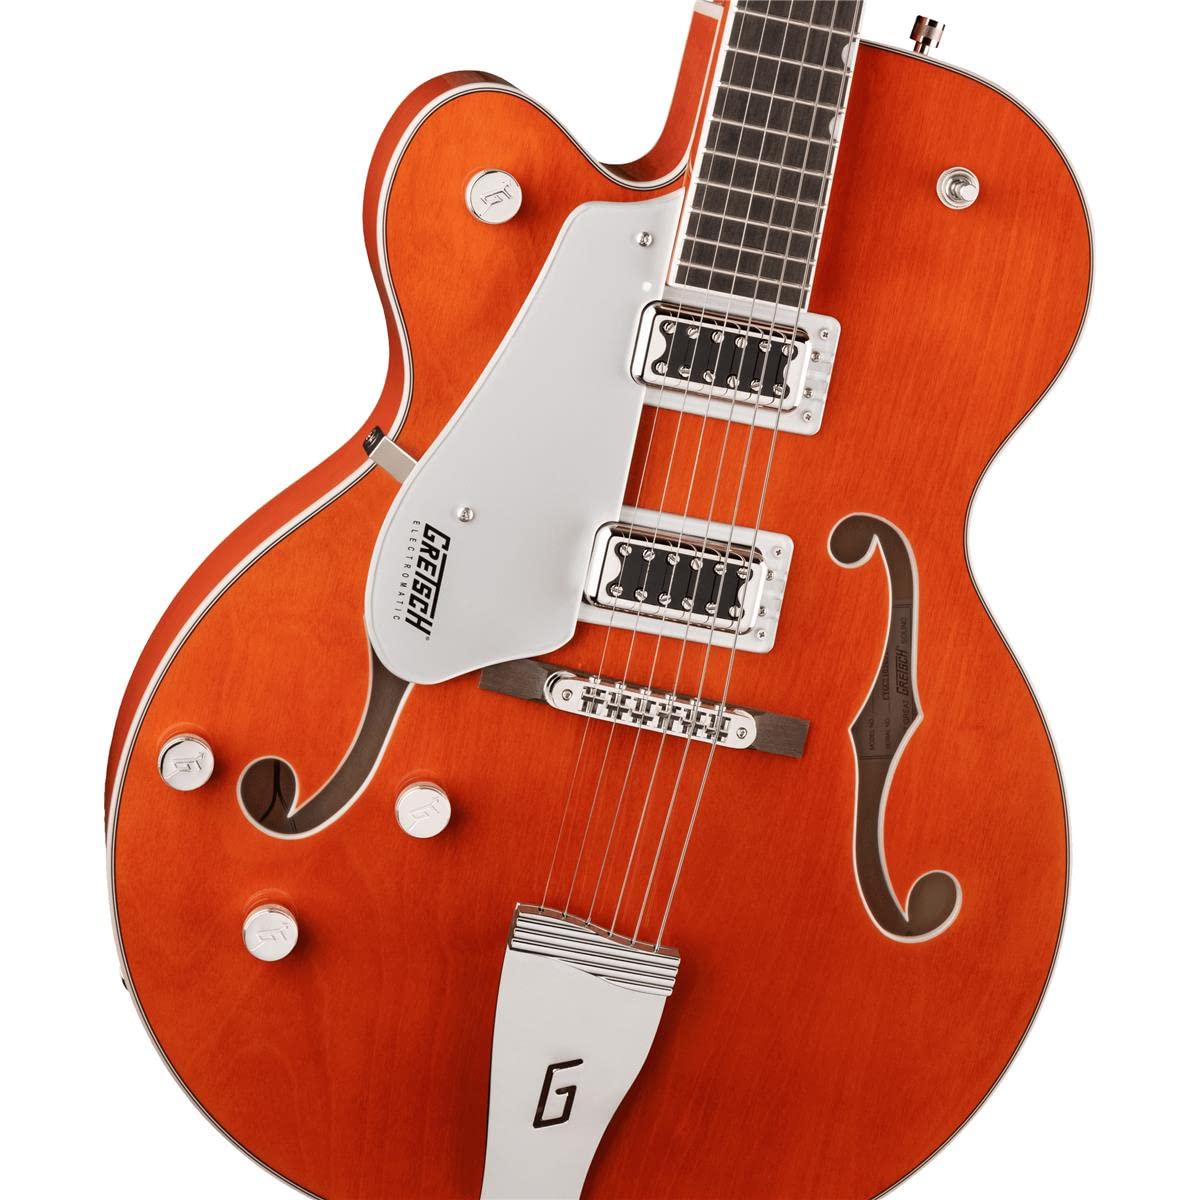 Gretsch G5420LH Electromatic Classic Hollowbody Single-cut Left-handed Electric Guitar - Orange Stain